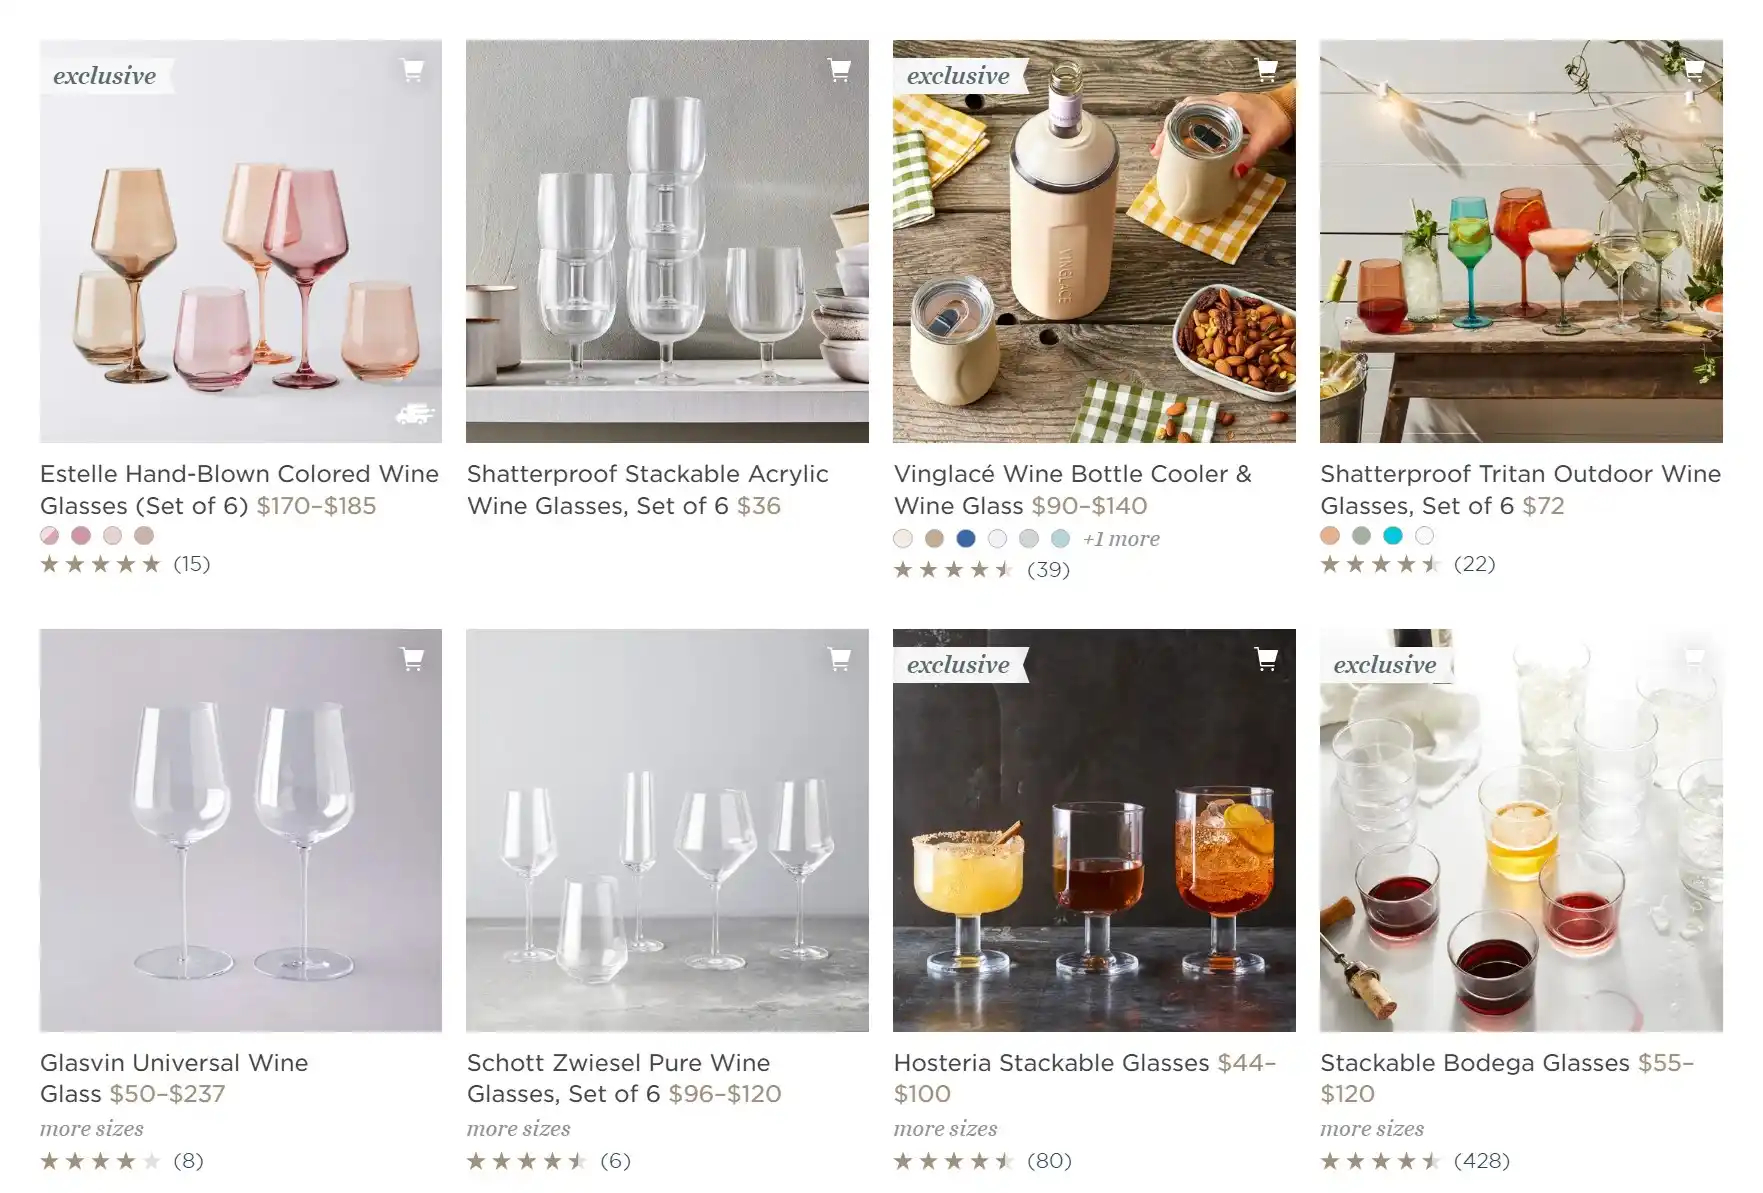 Don't dropship home decor that made of glass